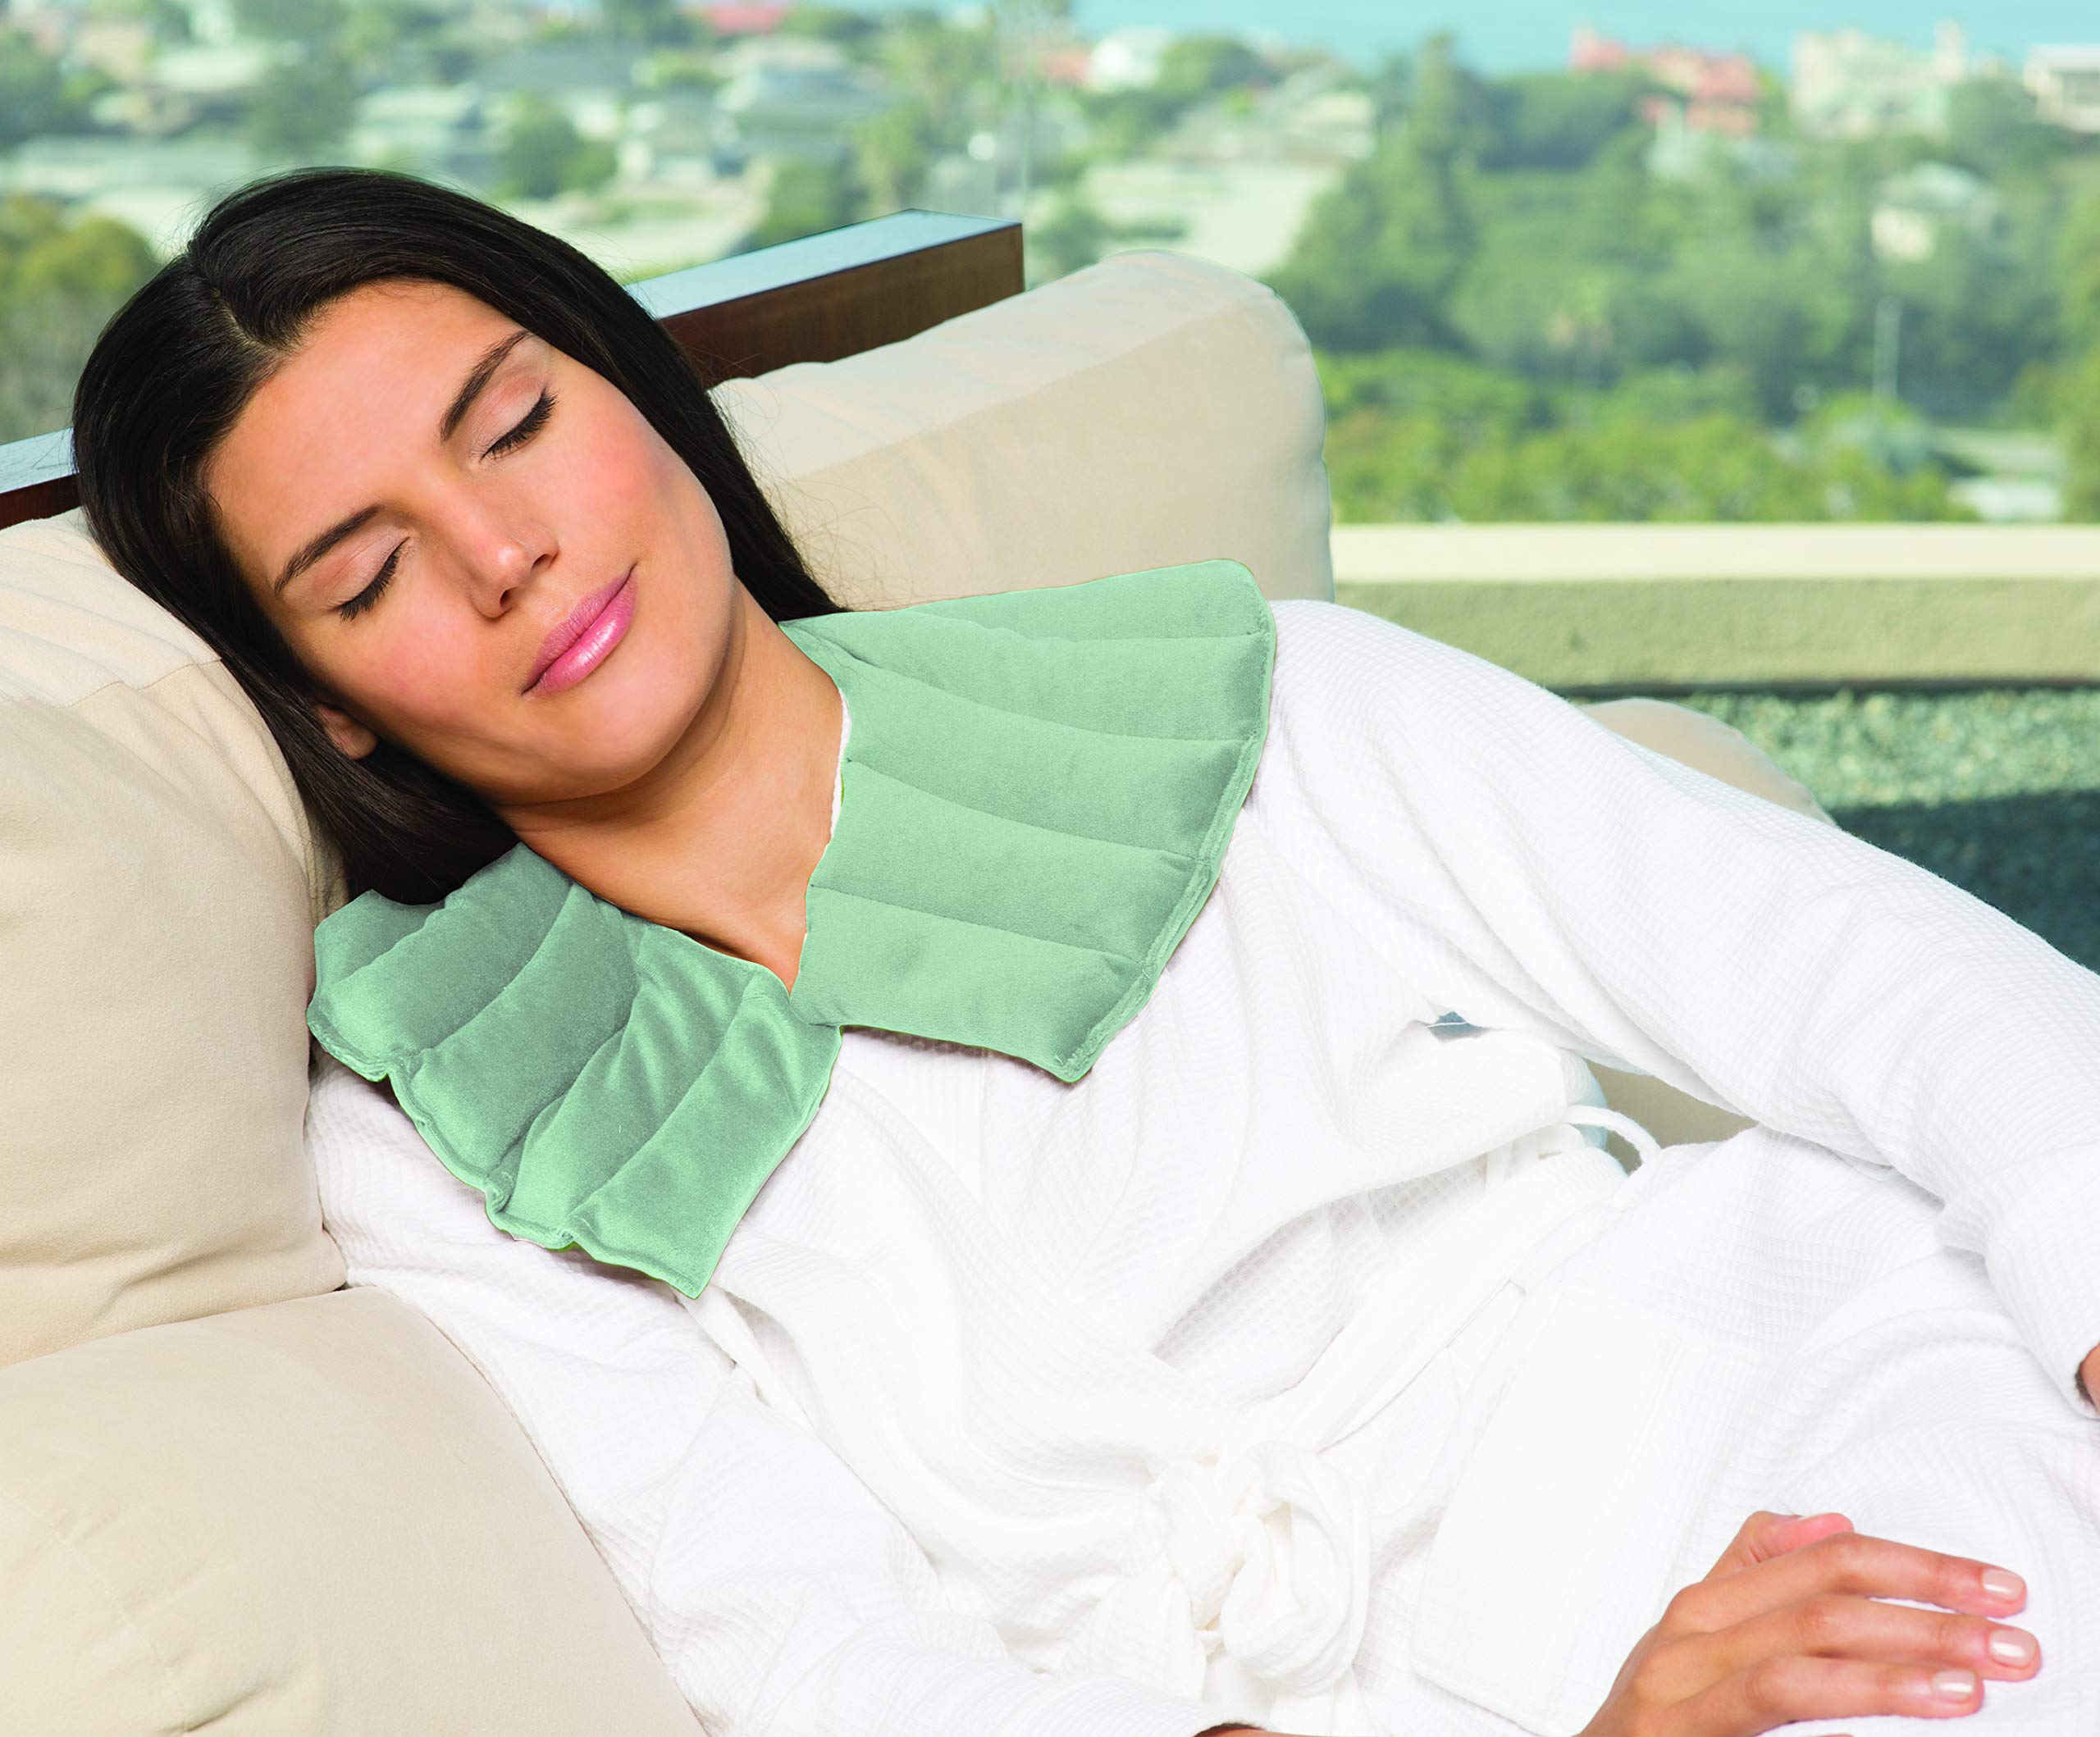 DreamTime Spa Comforts Microwaveable Shoulder Wrap with Aromatherapy, Neck Shoulder Relaxer, Hot or Cold Neck Wrap Lavender and Peppermint Herbal Stress Relief, Green